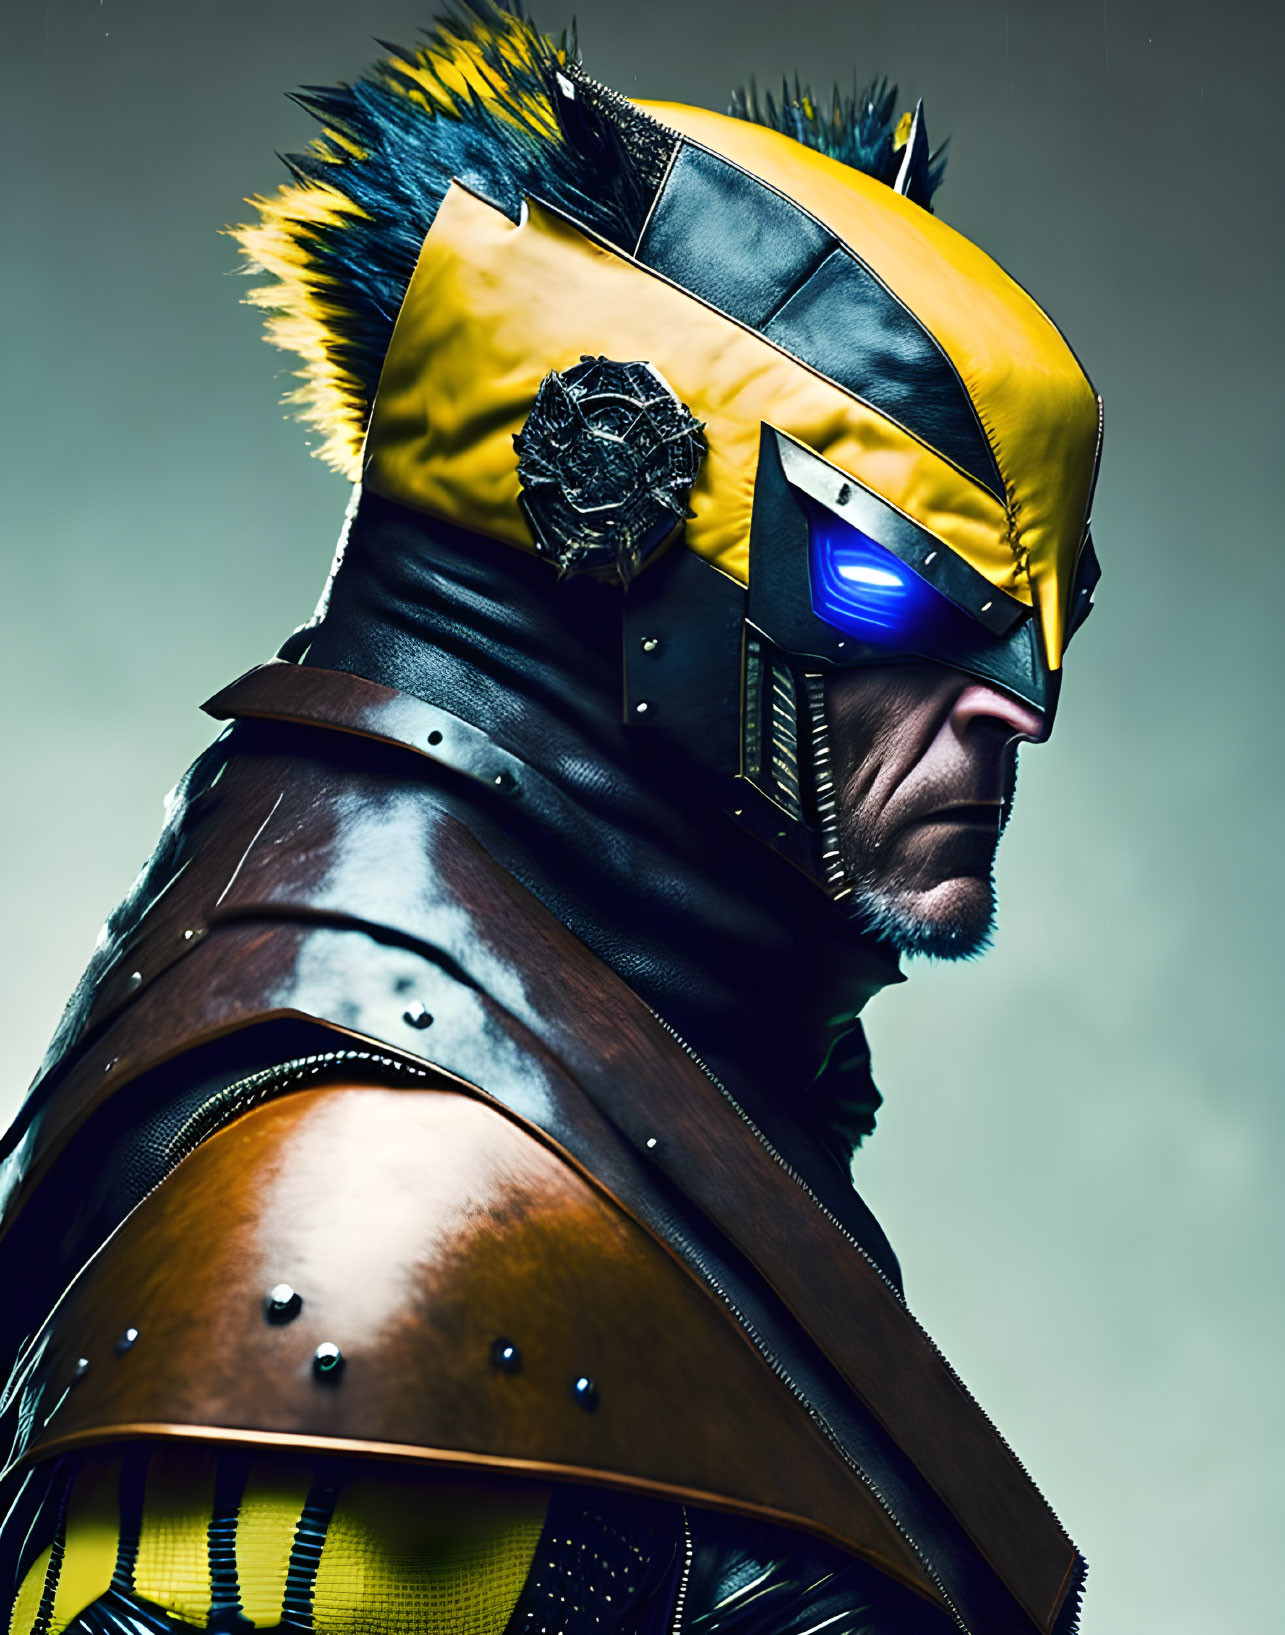 Futuristic knight in yellow and black costume with glowing blue visor